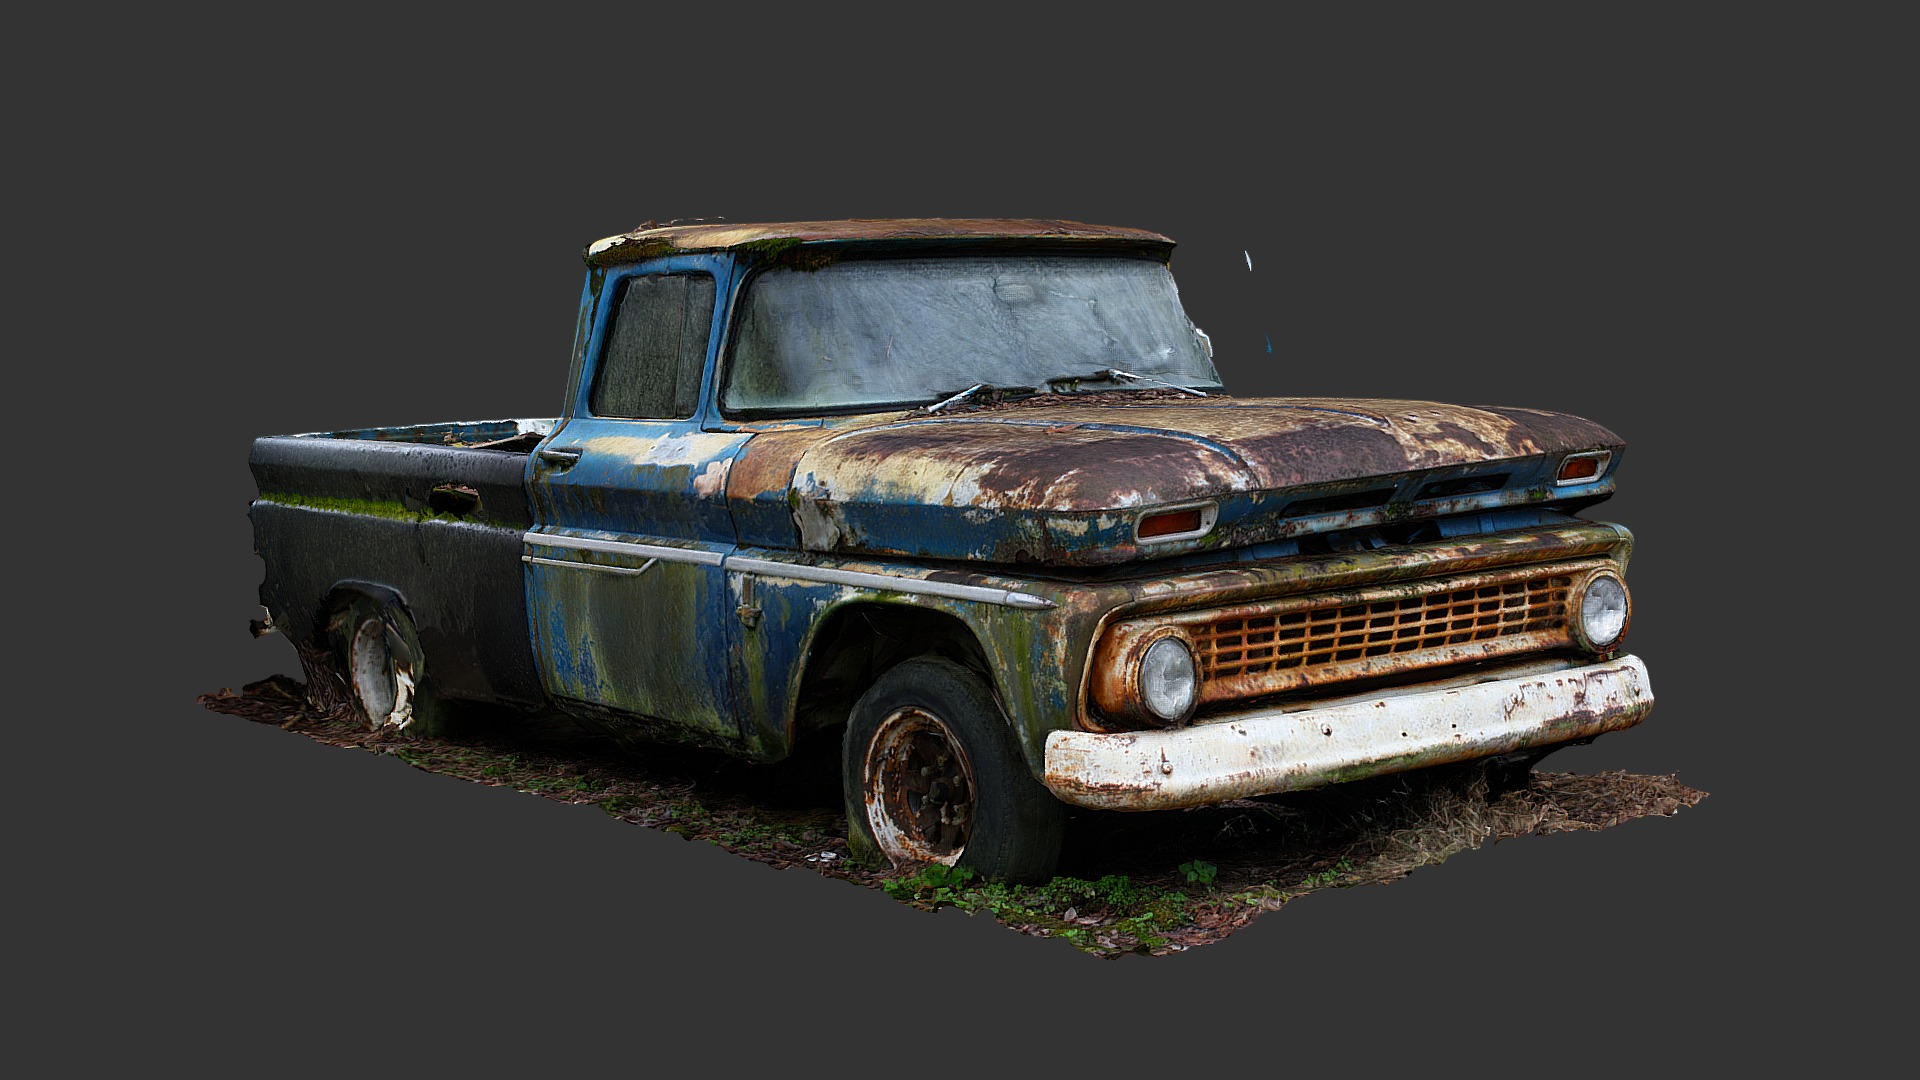 3D model Overgrown Pickup (Raw Scan) - This is a 3D model of the Overgrown Pickup (Raw Scan). The 3D model is about a blue truck with a rusty front end.